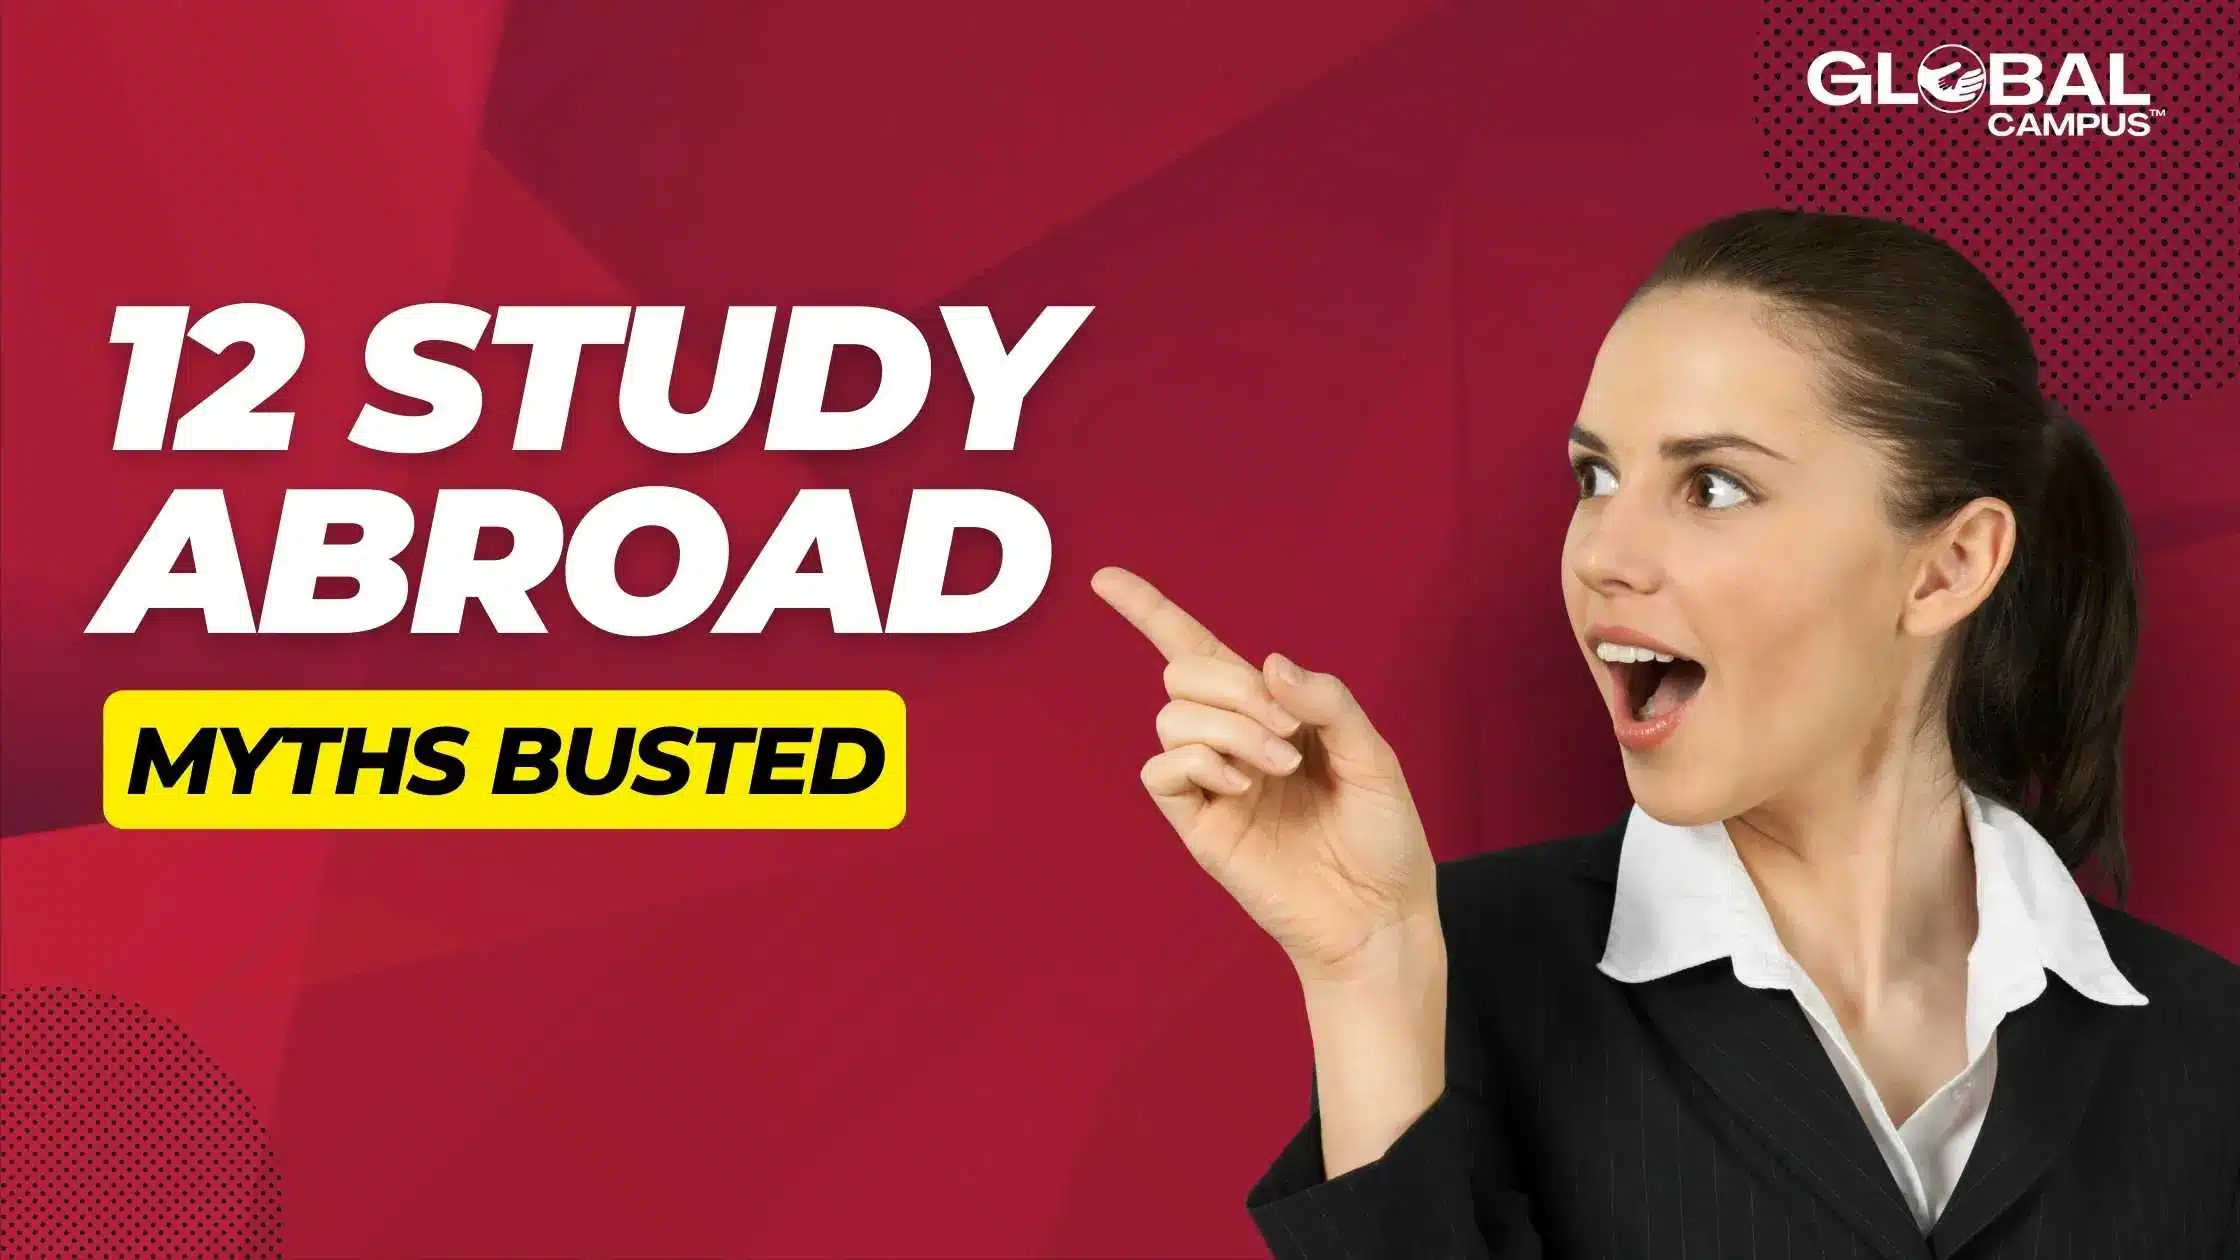 A girl pointing towards the title 12 study abroad myths busted